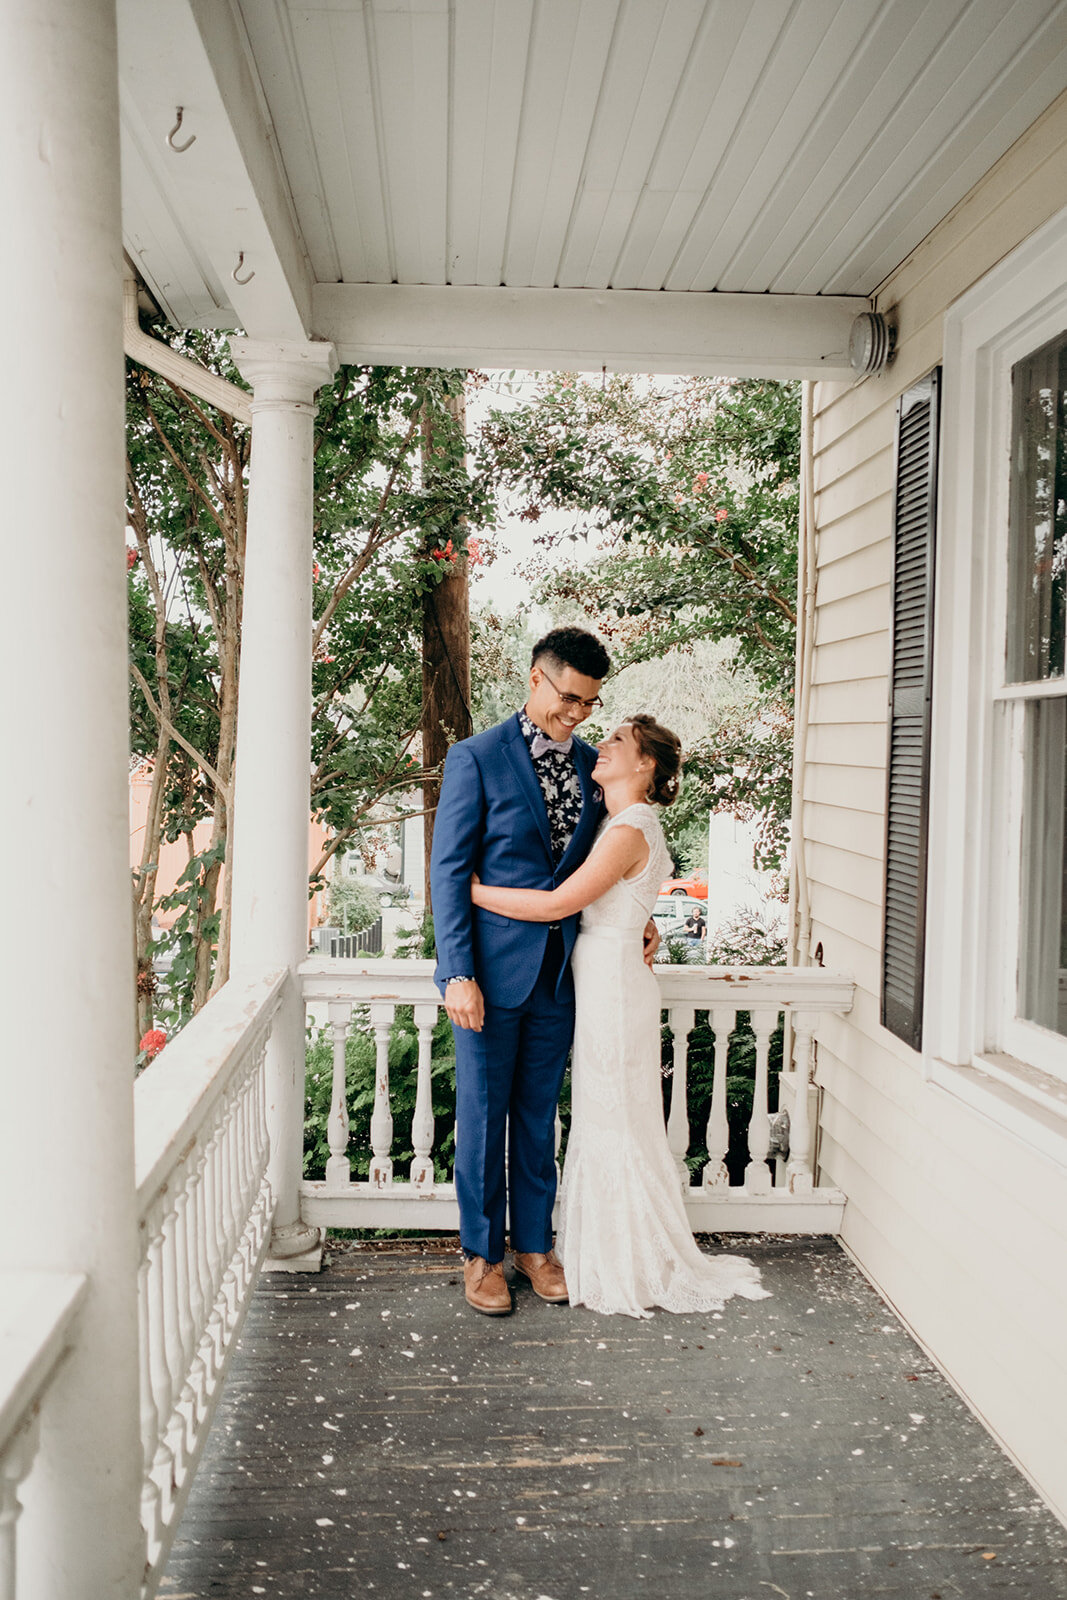 A bride and groom snuggle on a porch in downtown Leesburg, VA.